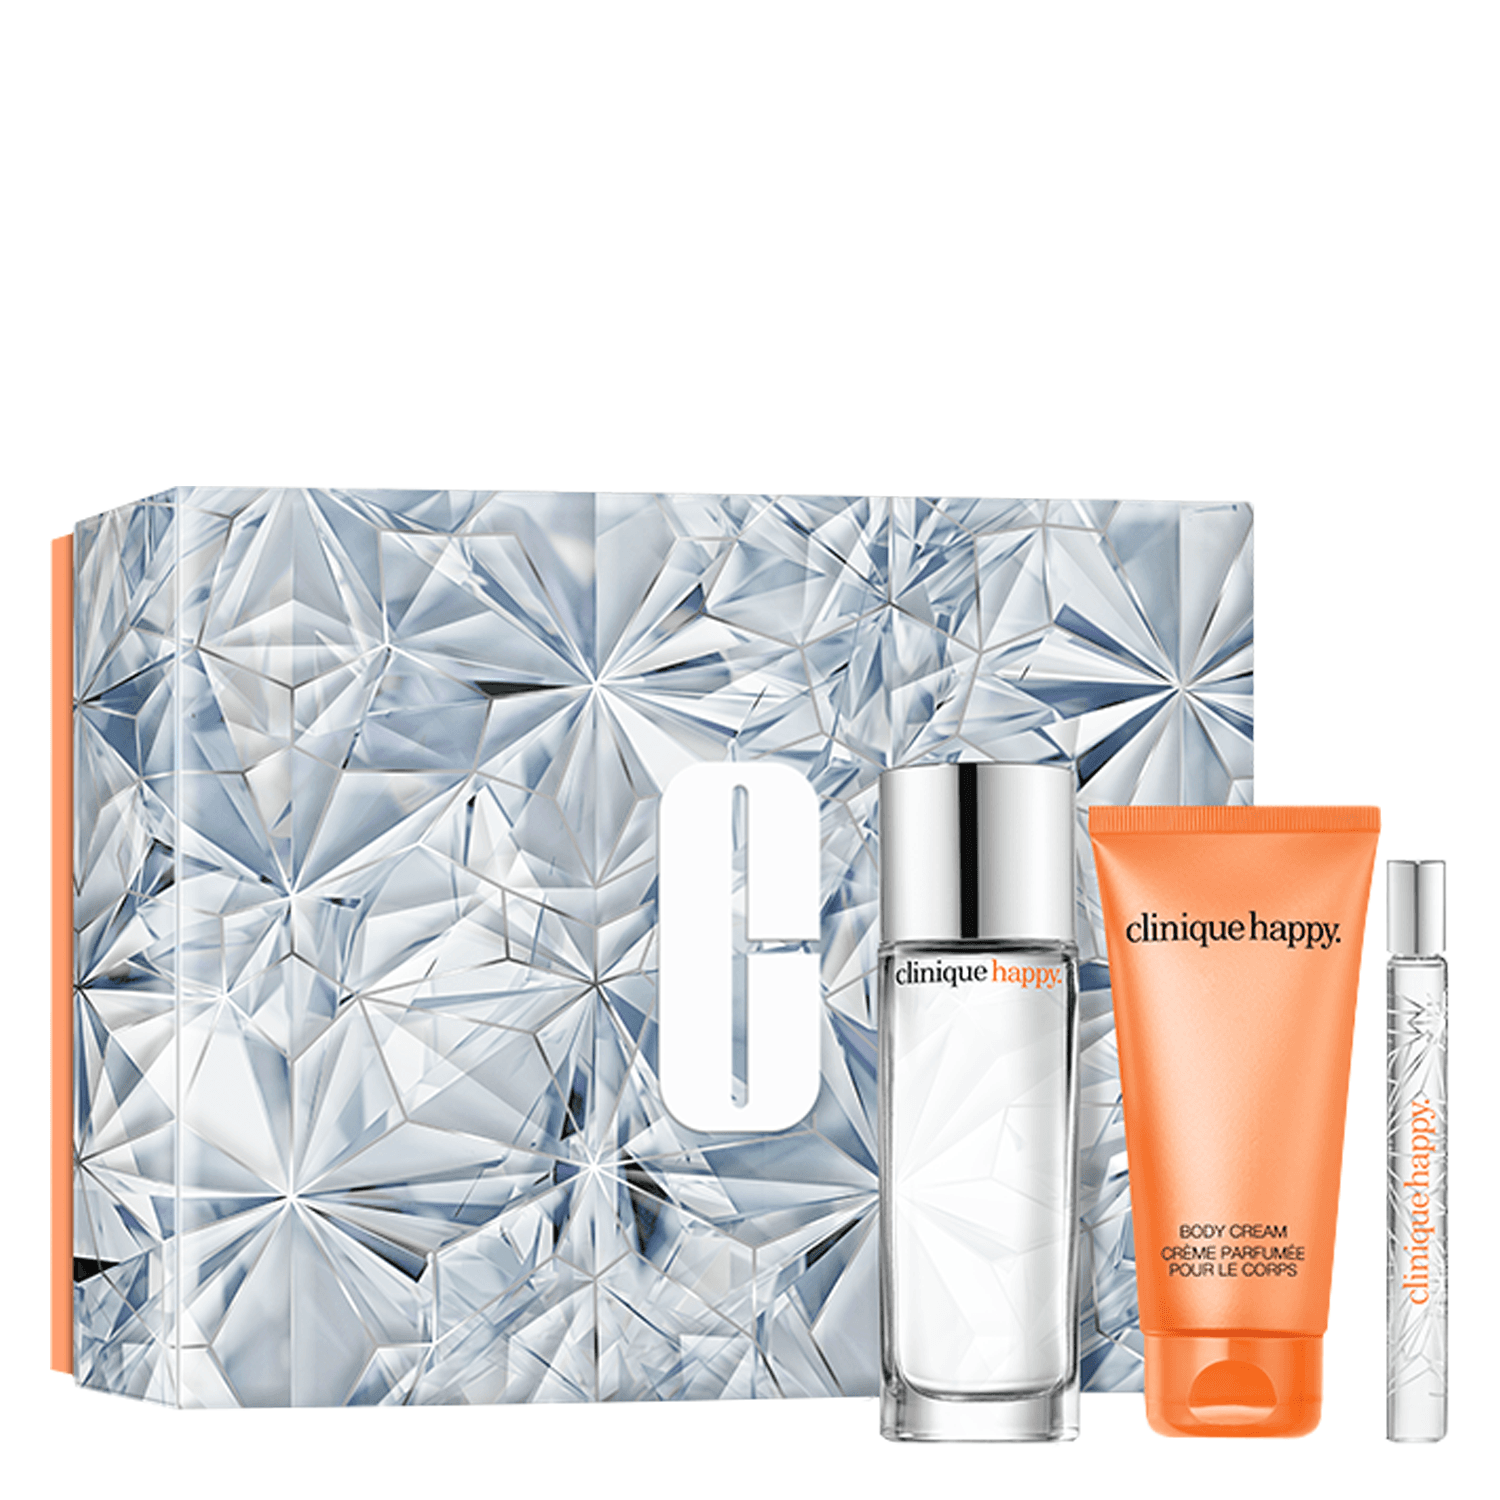 Clinique Set - Perfectly Happy